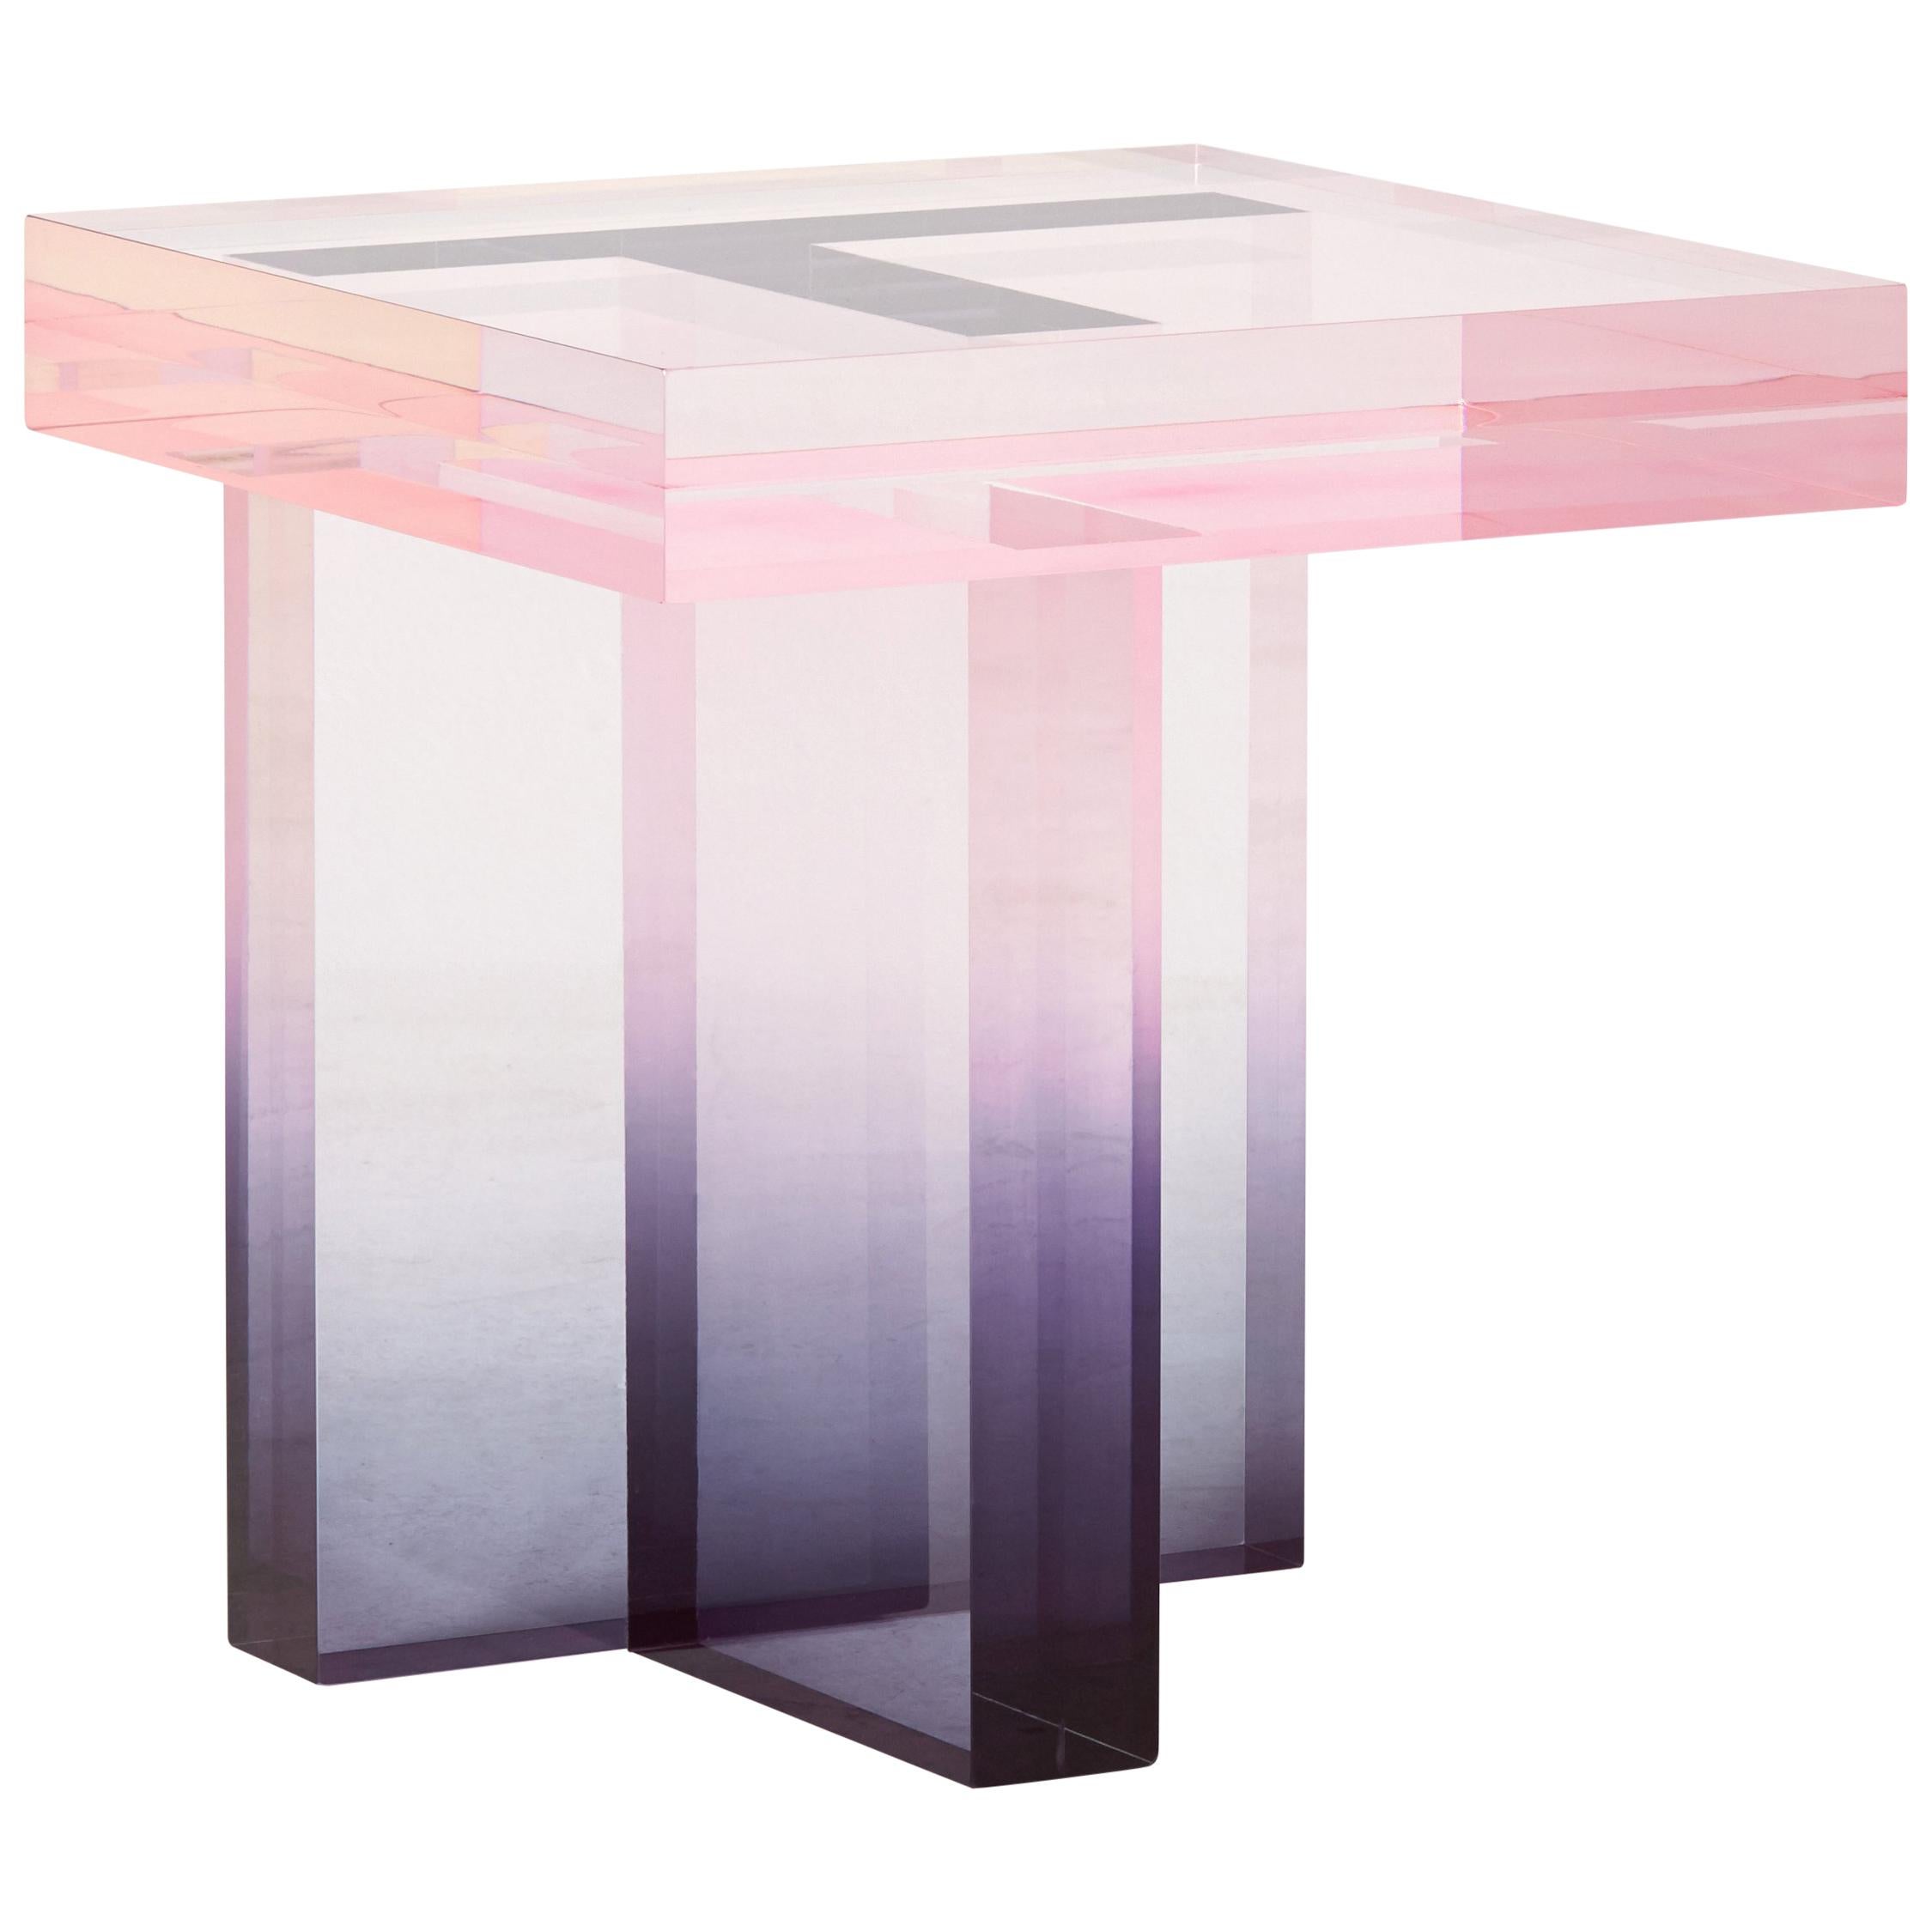 Crystal Series Table 01 Acrylic in Transparent Pink and Blue Customized